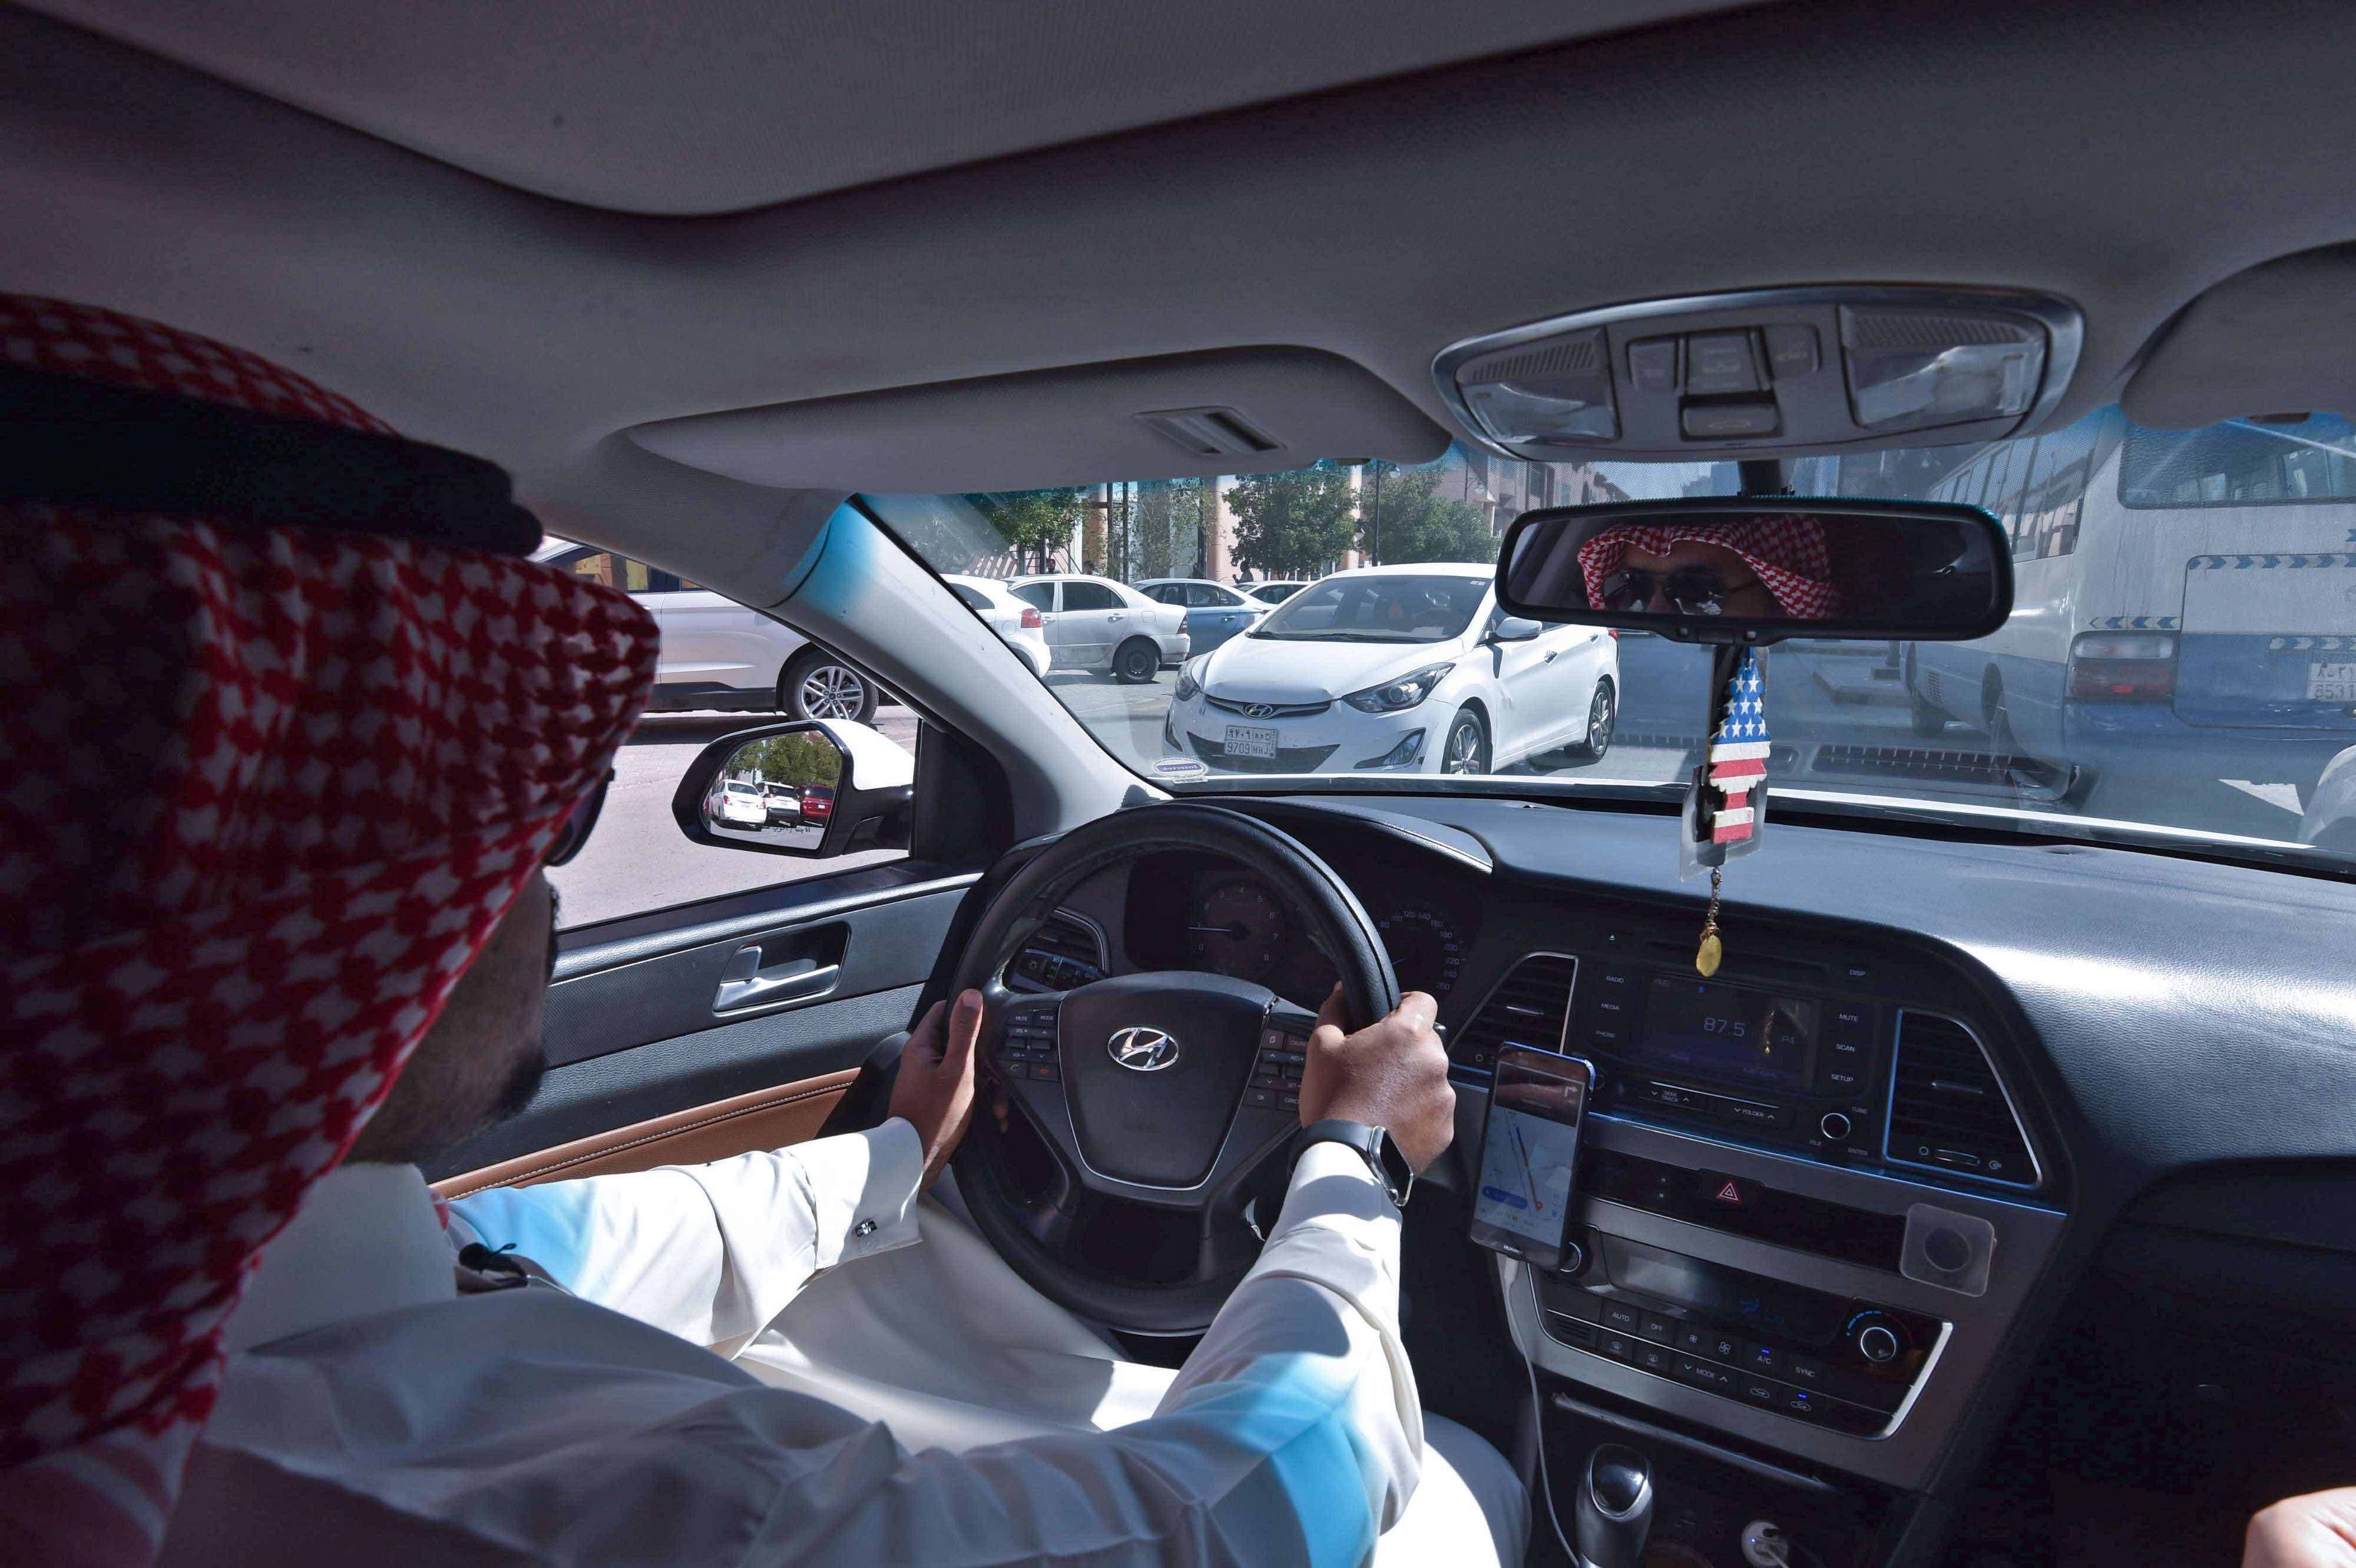 Like tens of thousands of Saudis looking to make extra money, 31-year-old Ahmed turned to the global giant Uber